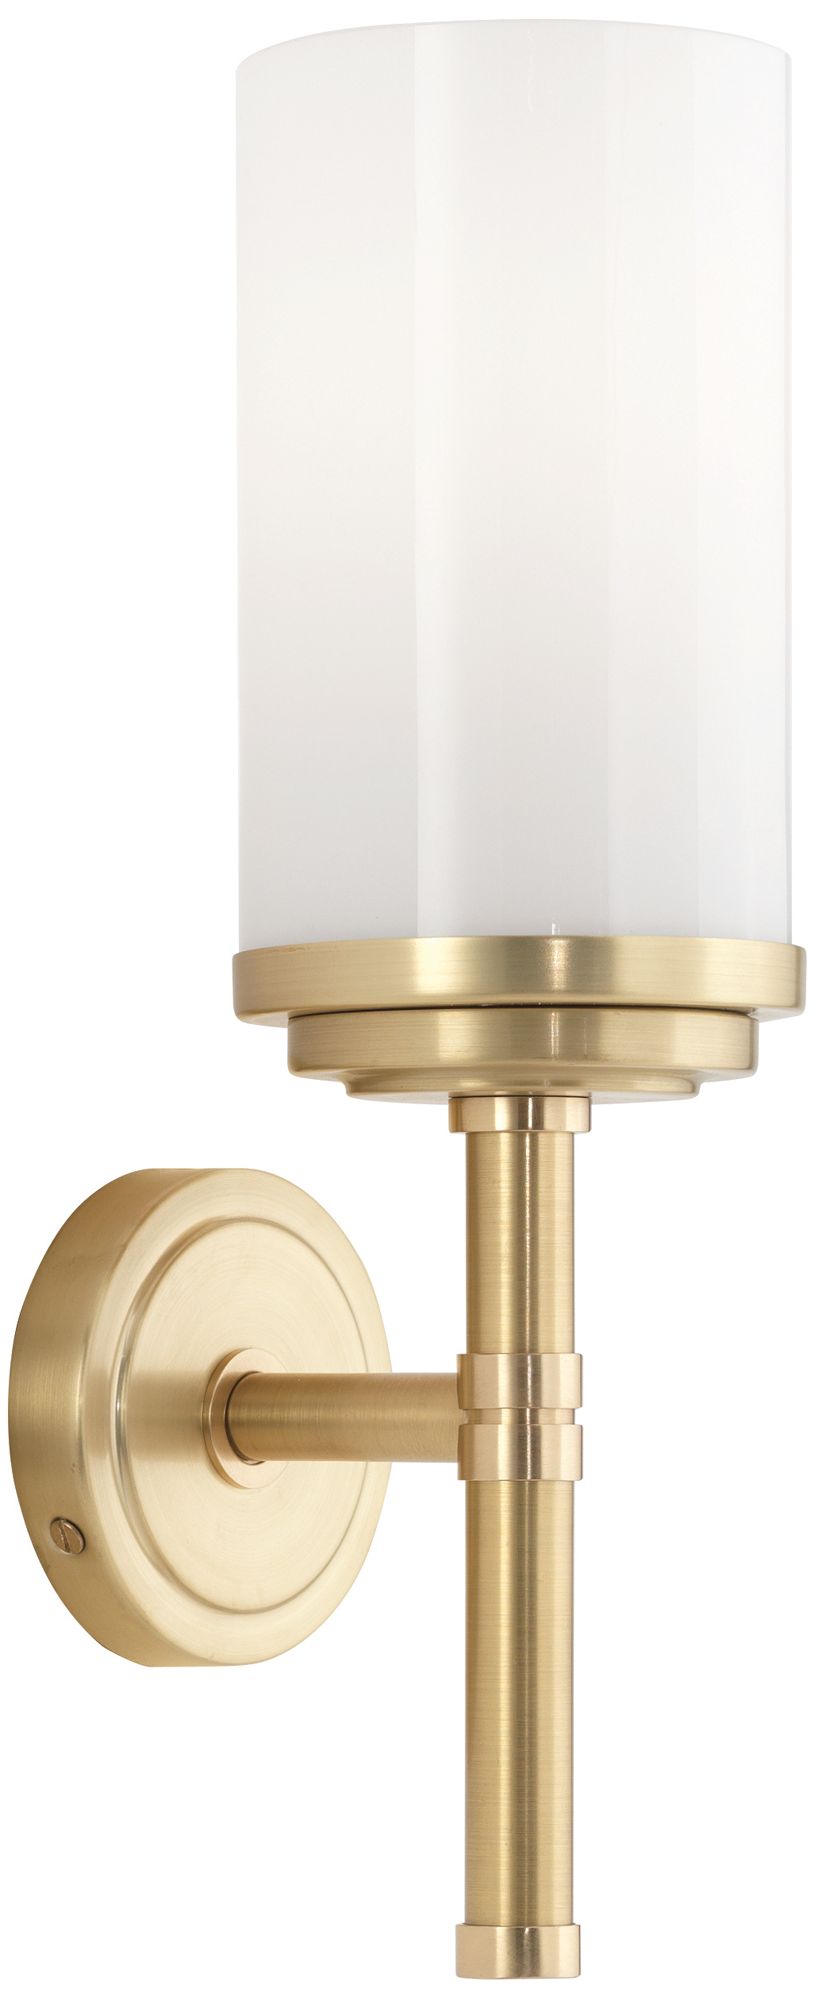 Robert Abbey Halo 13" Sconce Brass Finish With Cased White Glass Shade